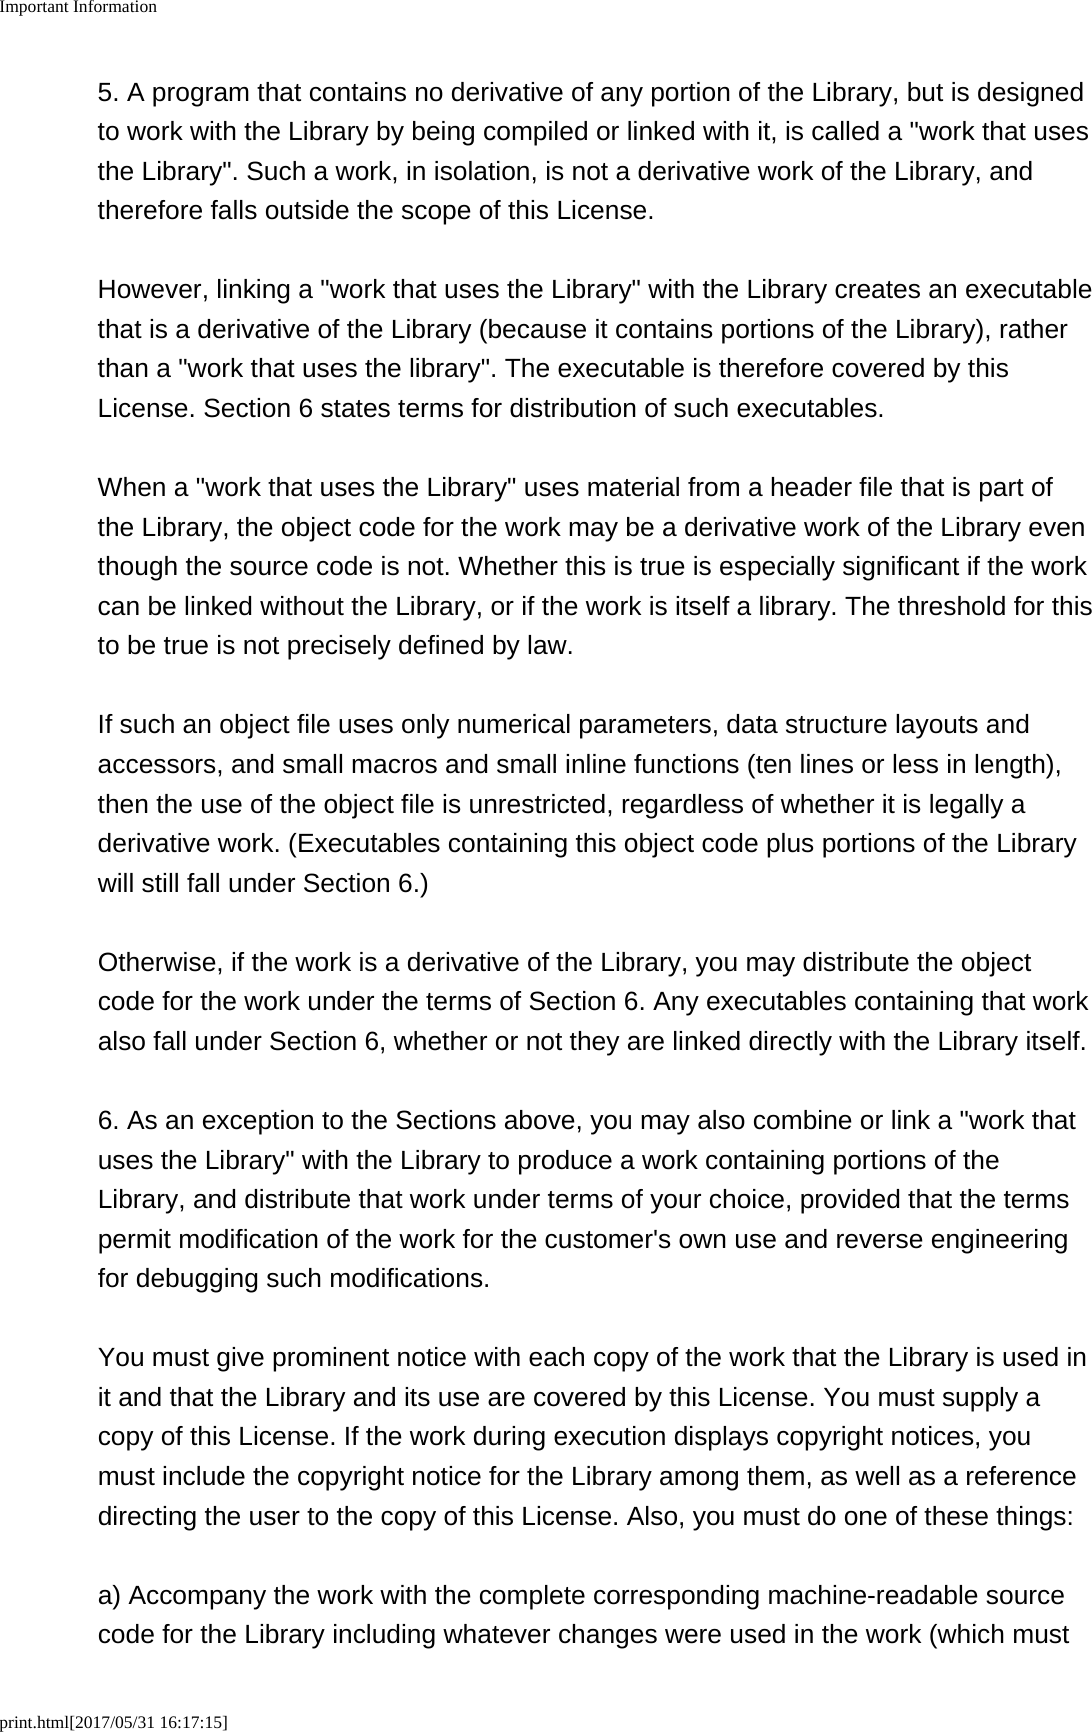 Important Informationprint.html[2017/05/31 16:17:15]5. A program that contains no derivative of any portion of the Library, but is designedto work with the Library by being compiled or linked with it, is called a &quot;work that usesthe Library&quot;. Such a work, in isolation, is not a derivative work of the Library, andtherefore falls outside the scope of this License.However, linking a &quot;work that uses the Library&quot; with the Library creates an executablethat is a derivative of the Library (because it contains portions of the Library), ratherthan a &quot;work that uses the library&quot;. The executable is therefore covered by thisLicense. Section 6 states terms for distribution of such executables.When a &quot;work that uses the Library&quot; uses material from a header file that is part ofthe Library, the object code for the work may be a derivative work of the Library eventhough the source code is not. Whether this is true is especially significant if the workcan be linked without the Library, or if the work is itself a library. The threshold for thisto be true is not precisely defined by law.If such an object file uses only numerical parameters, data structure layouts andaccessors, and small macros and small inline functions (ten lines or less in length),then the use of the object file is unrestricted, regardless of whether it is legally aderivative work. (Executables containing this object code plus portions of the Librarywill still fall under Section 6.)Otherwise, if the work is a derivative of the Library, you may distribute the objectcode for the work under the terms of Section 6. Any executables containing that workalso fall under Section 6, whether or not they are linked directly with the Library itself.6. As an exception to the Sections above, you may also combine or link a &quot;work thatuses the Library&quot; with the Library to produce a work containing portions of theLibrary, and distribute that work under terms of your choice, provided that the termspermit modification of the work for the customer&apos;s own use and reverse engineeringfor debugging such modifications.You must give prominent notice with each copy of the work that the Library is used init and that the Library and its use are covered by this License. You must supply acopy of this License. If the work during execution displays copyright notices, youmust include the copyright notice for the Library among them, as well as a referencedirecting the user to the copy of this License. Also, you must do one of these things:a) Accompany the work with the complete corresponding machine-readable sourcecode for the Library including whatever changes were used in the work (which must